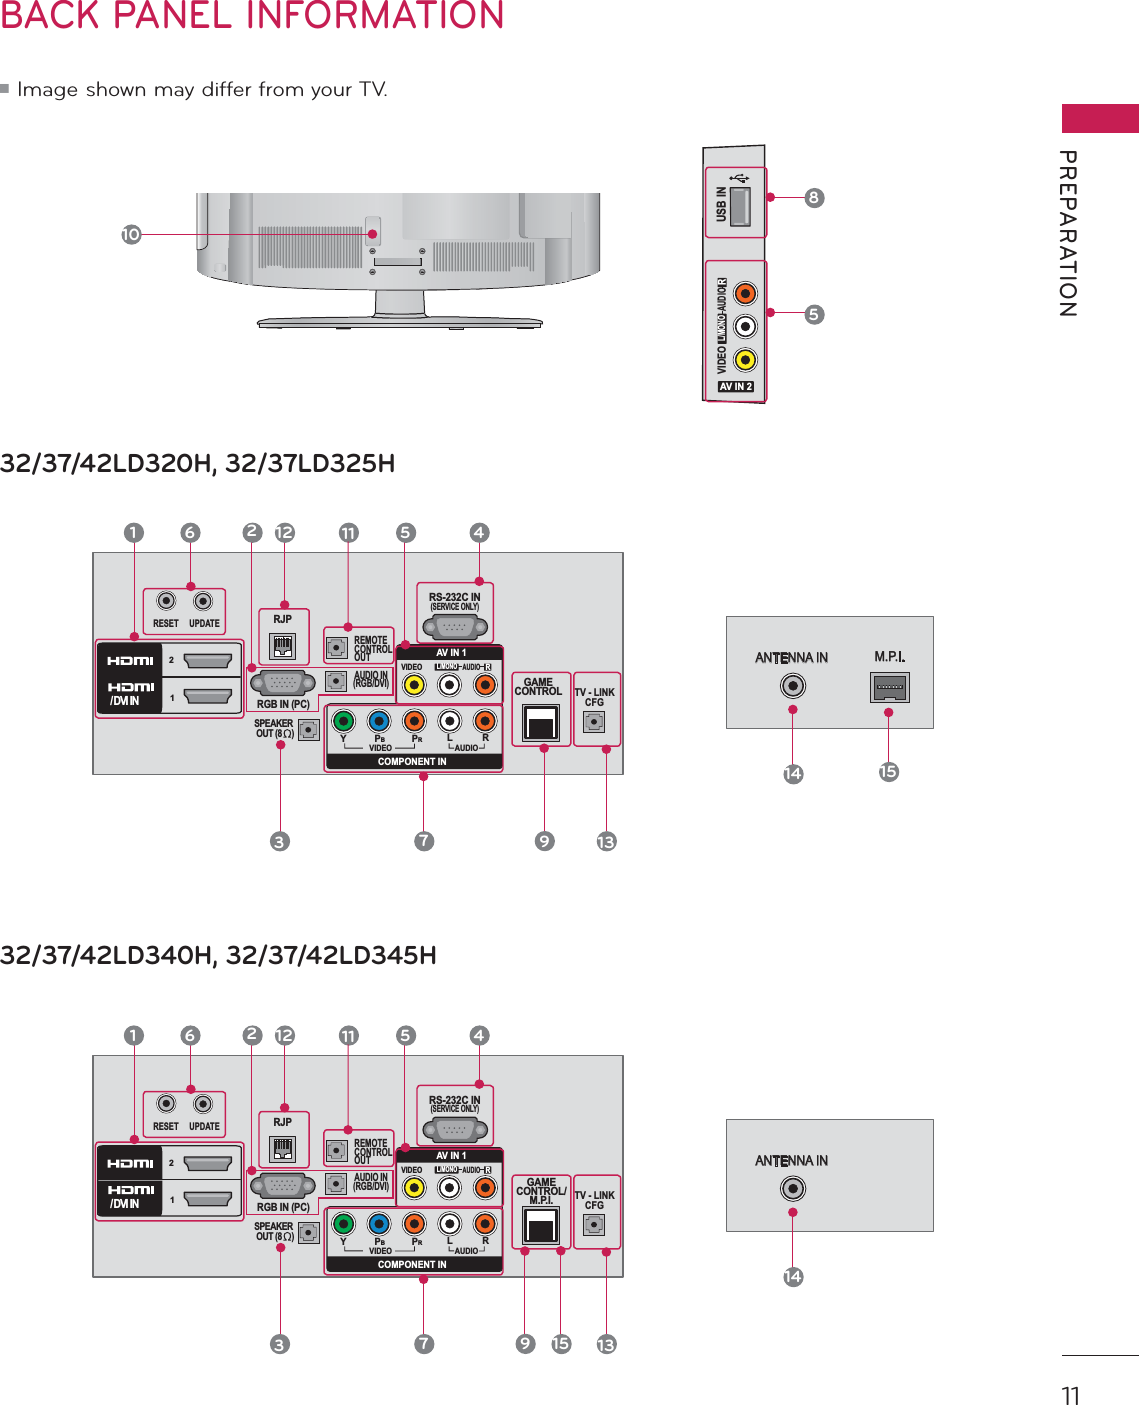 11PREPARATIONBACK PANEL INFORMATIONᯫ Image shown may differ from your TV.10USB INAV IN 2VIDEOAUDIOL/MONOR85RGB IN (PC)AUDIO IN(RGB/DVI)RS-232C IN(SERVICE ONLY)VIDEOAUDIOL/MONORVIDEO AUDIOCOMPONENT INAV IN 1YPBPRLR21/DVIINREMOTECONTROLOUTSPEAKER OUT (8     )  RJPRESETUPDATETV - LINKCFGGAMECONTROL1211 5  47312691332/37/42LD320H, 32/37LD325HANTENNA IN M.P.I.14 1532/37/42LD340H, 32/37/42LD345HANTENNA IN14RGB IN (PC)AUDIO IN(RGB/DVI)RS-232C IN(SERVICE ONLY)VIDEOAUDIOL/MONORVIDEO AUDIOCOMPONENT INAV IN 1YPBPRLR21/DVIINREMOTECONTROLOUTSPEAKER OUT (8     )  RJPRESETUPDATETV - LINKCFGGAMECONTROL/M.P.I.1211 5  47312691315